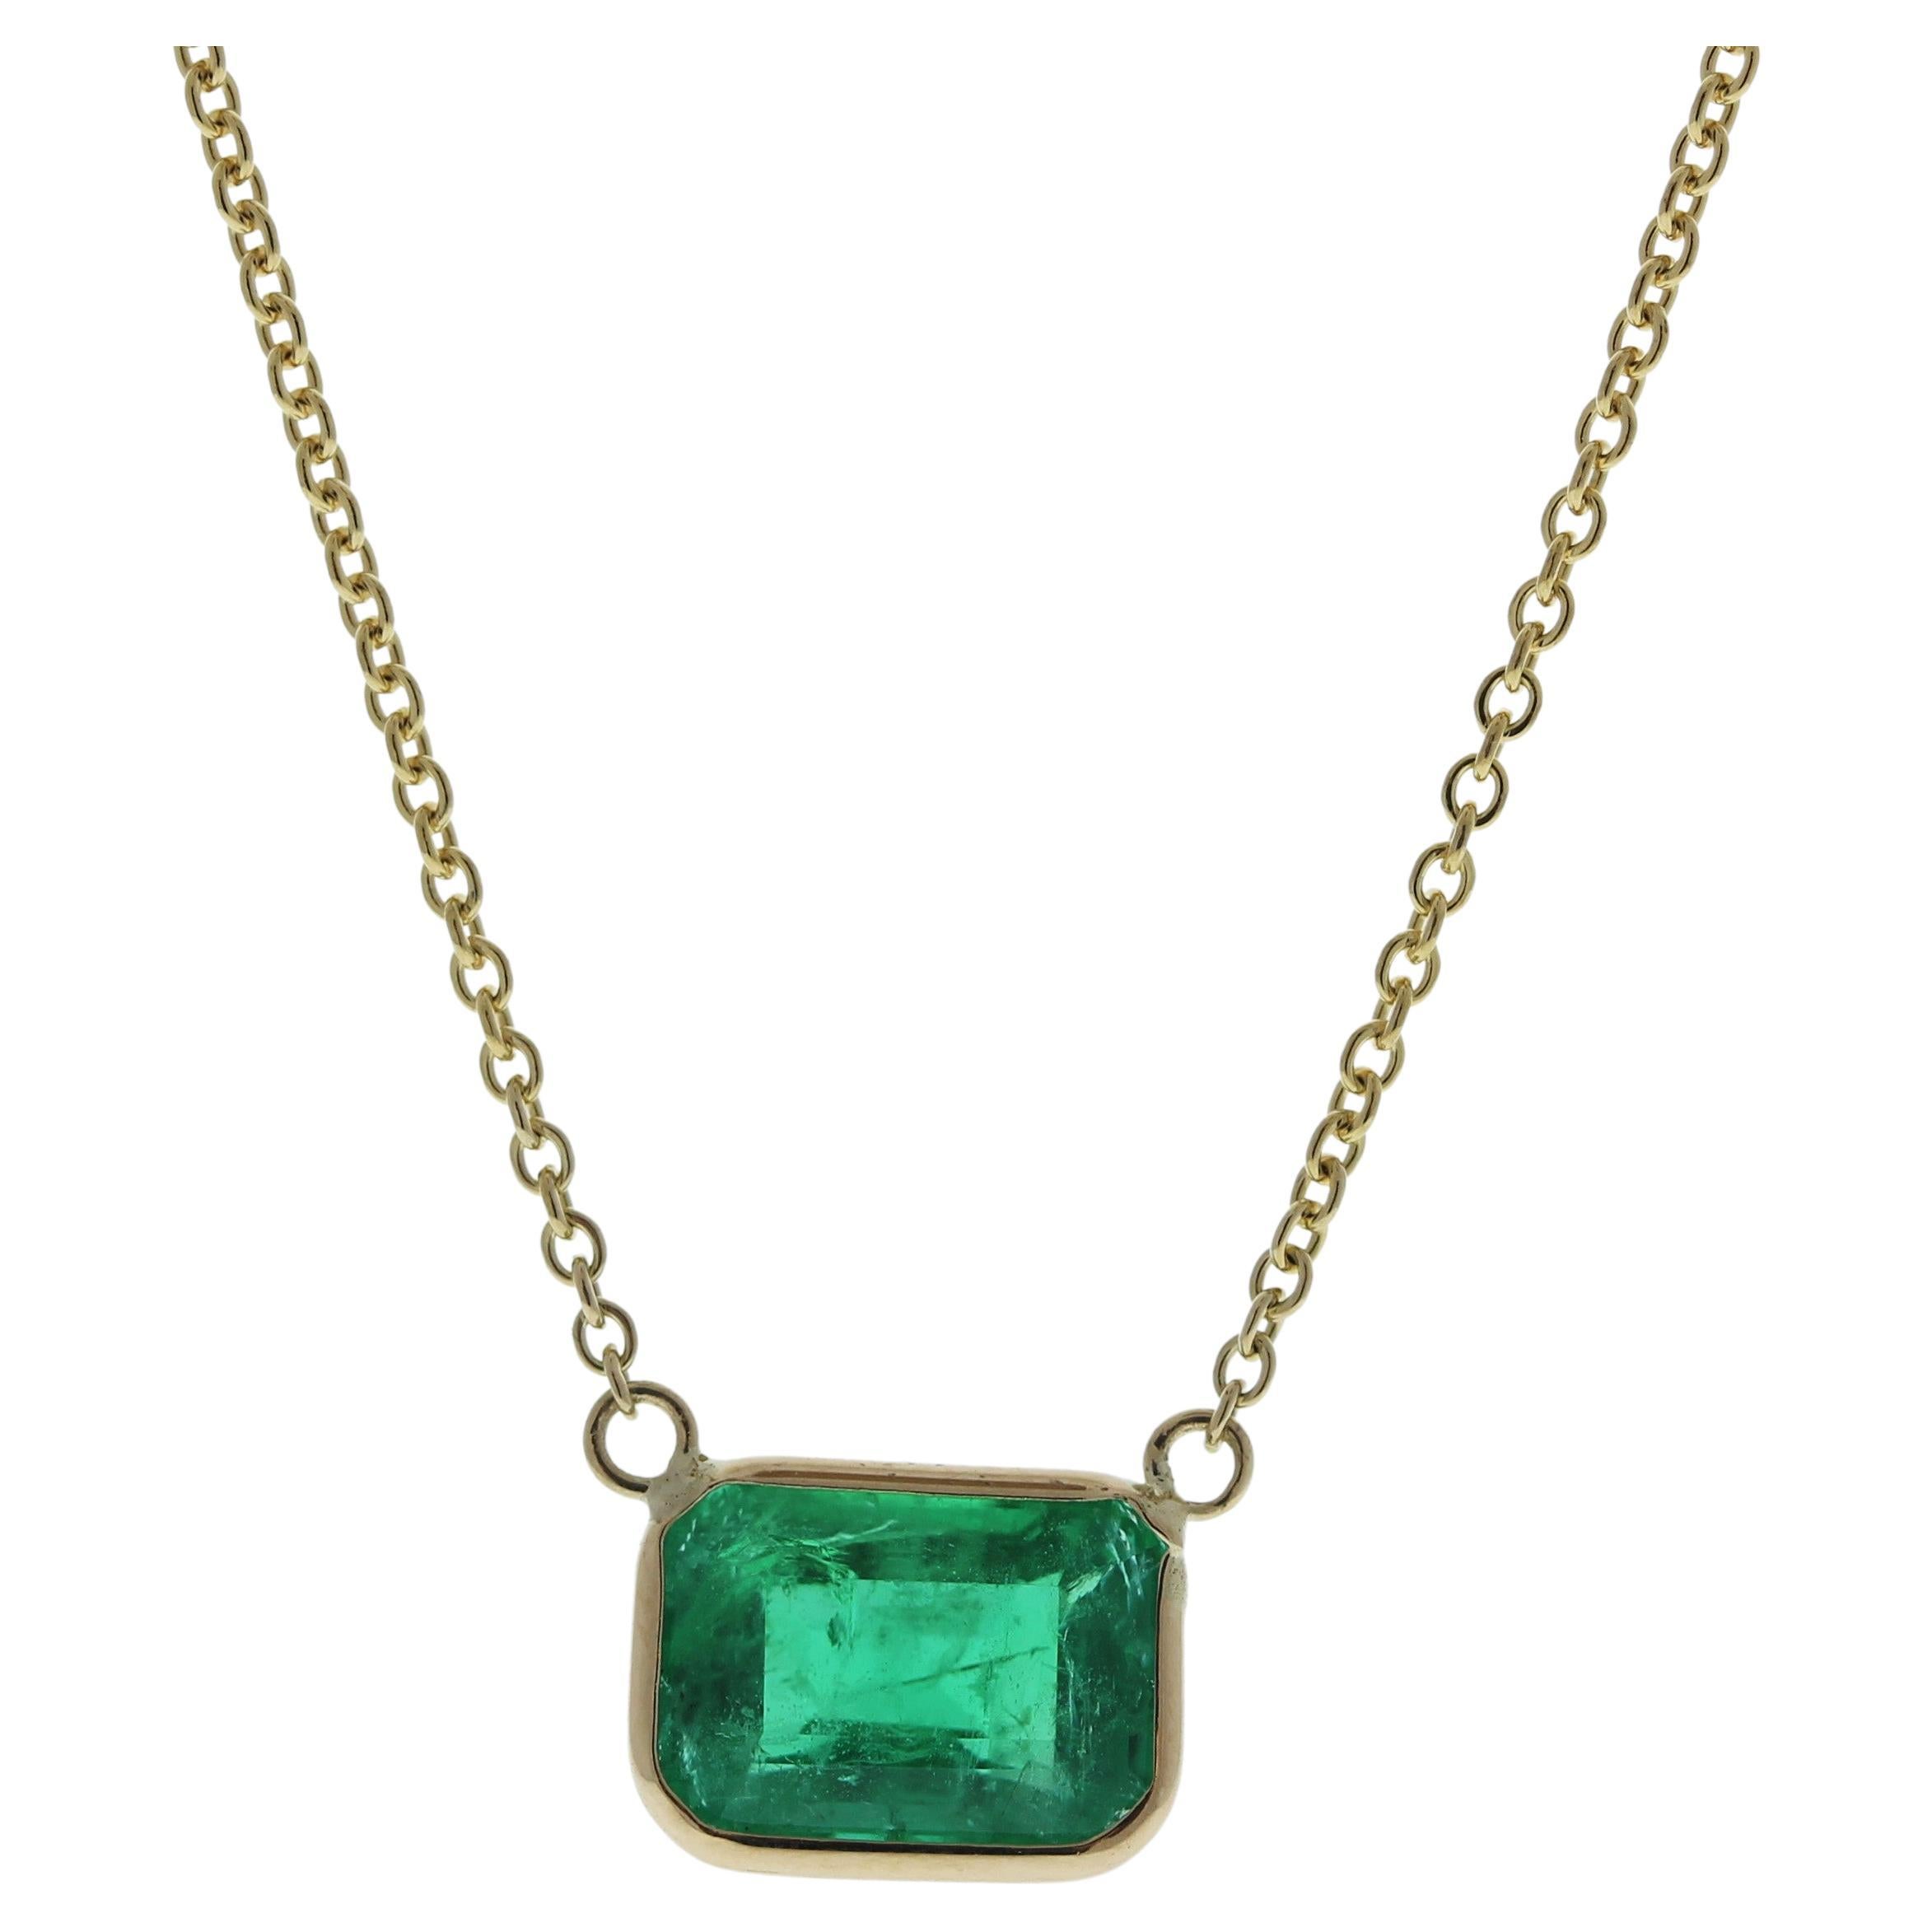 1.97 Carat Emerald Green Fashion Necklaces In 14k Yellow Gold For Sale